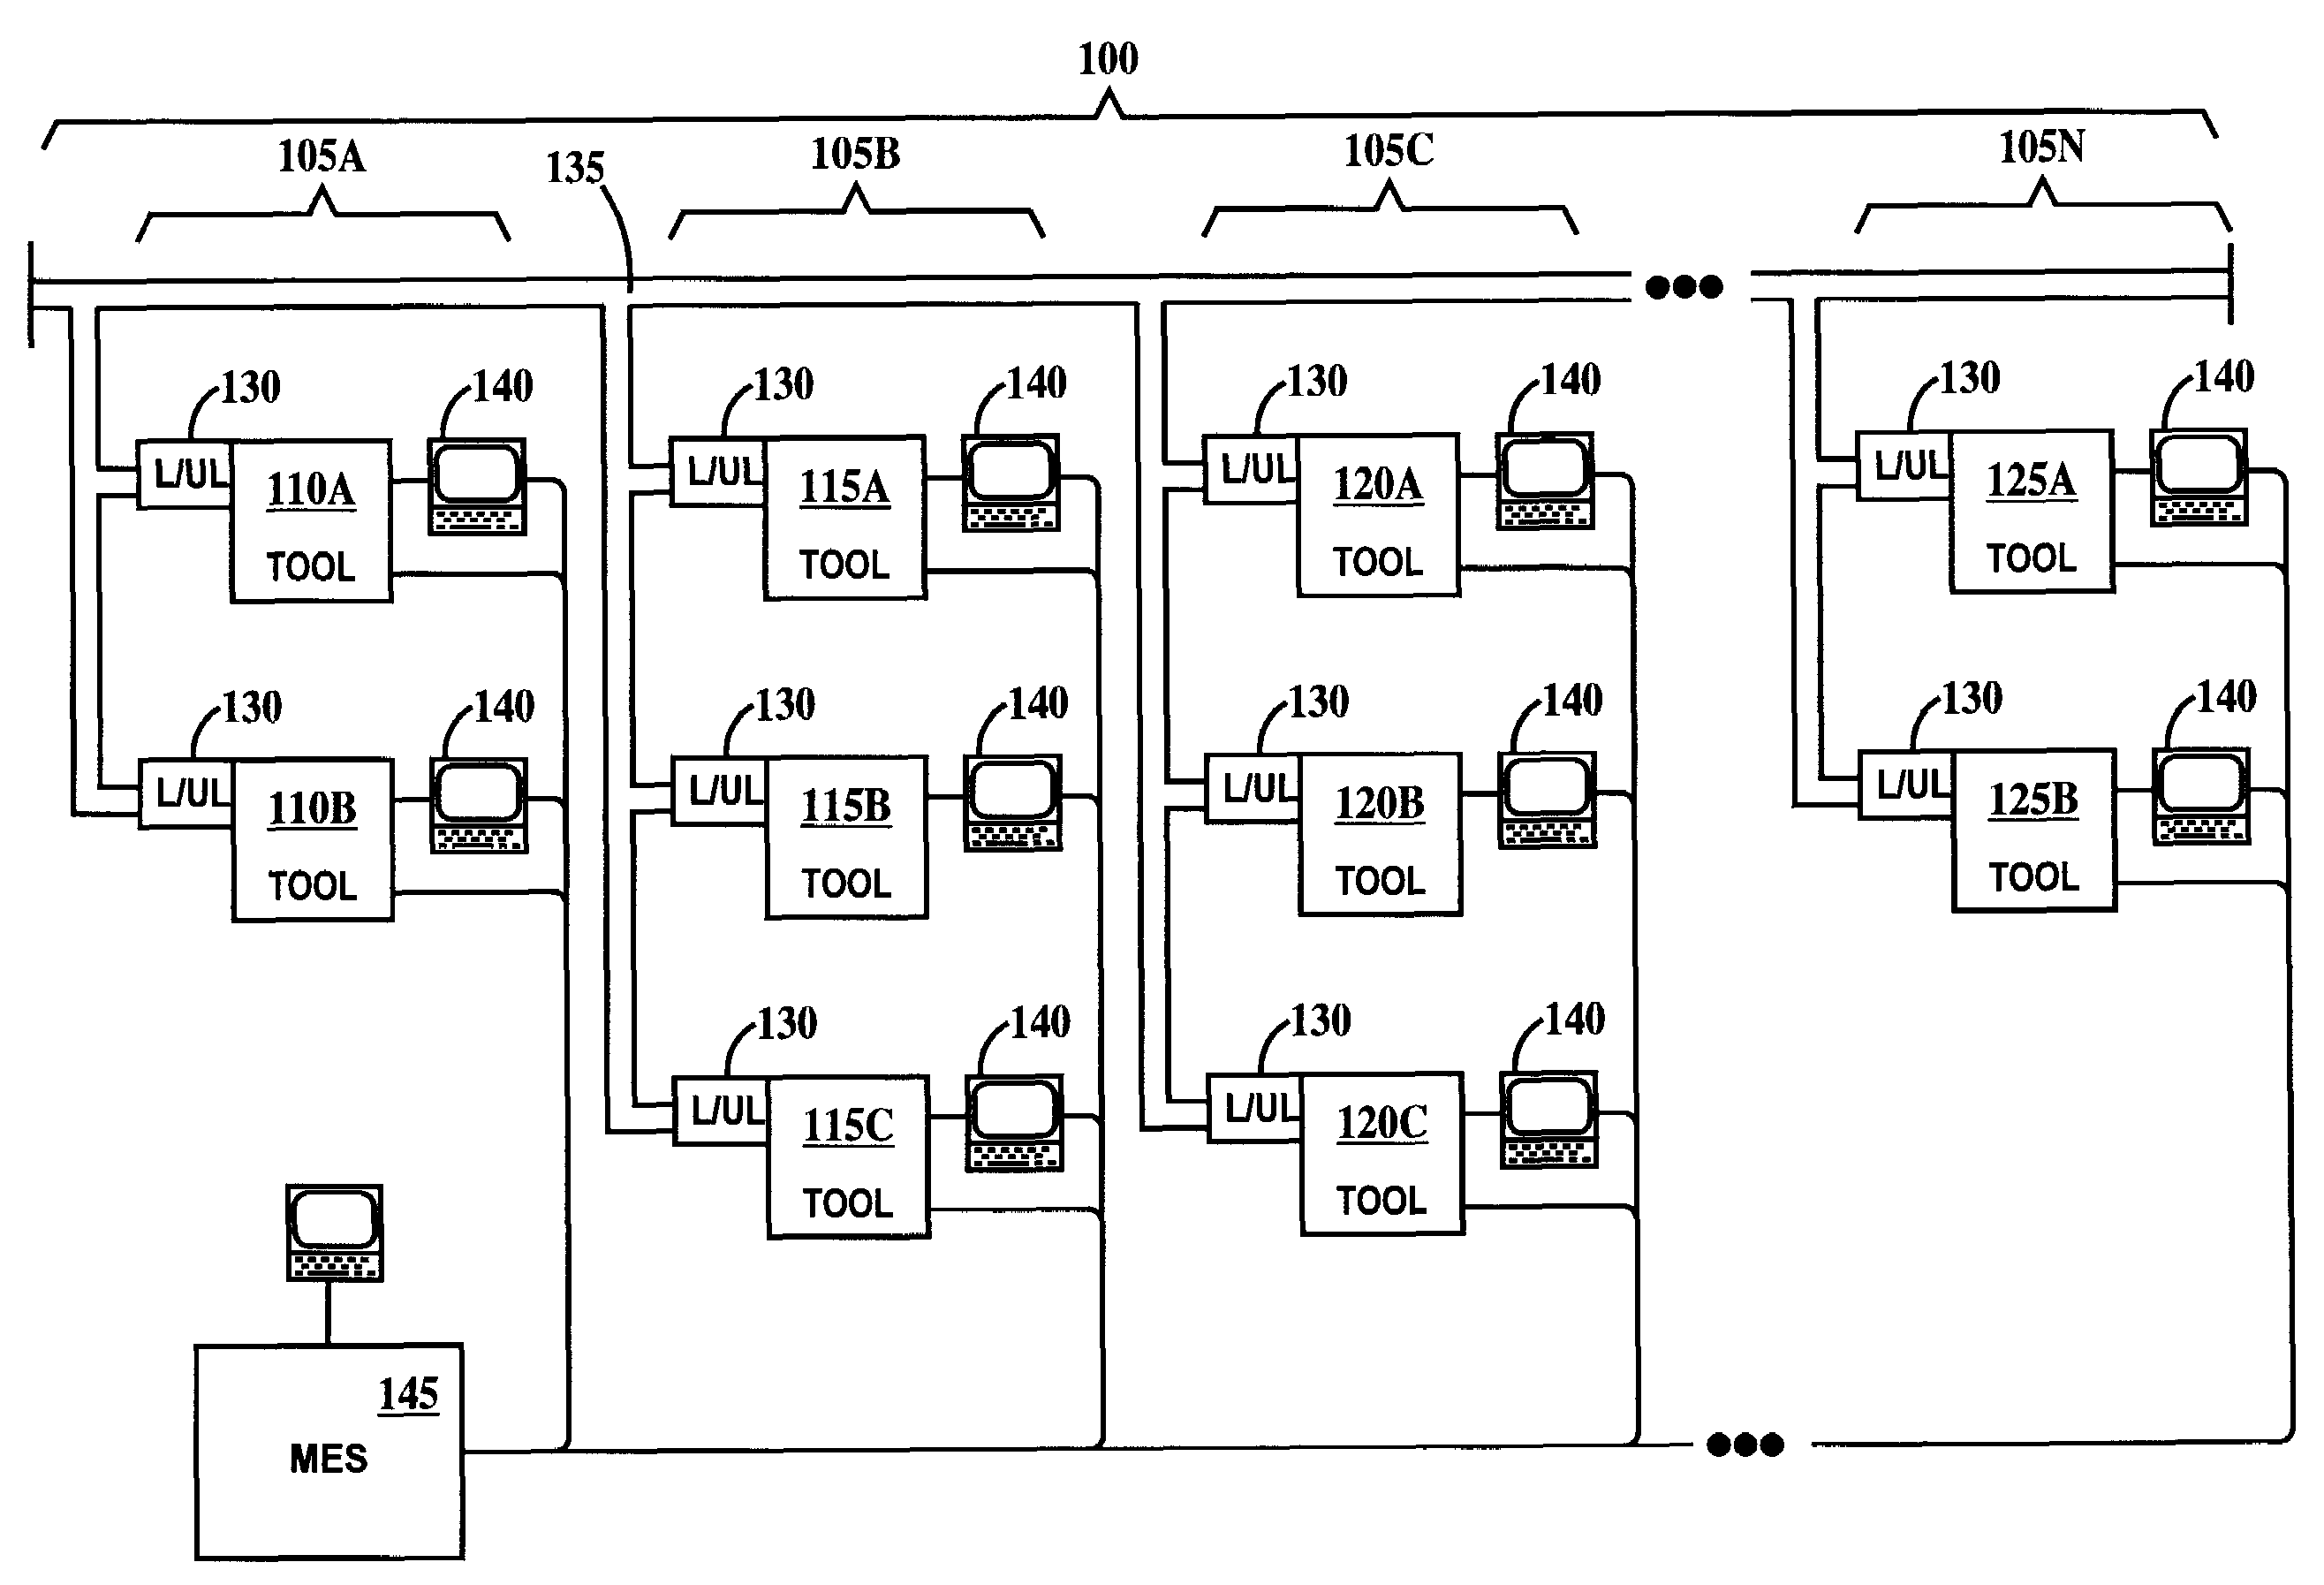 Method of release and product flow management for a manufacturing facility